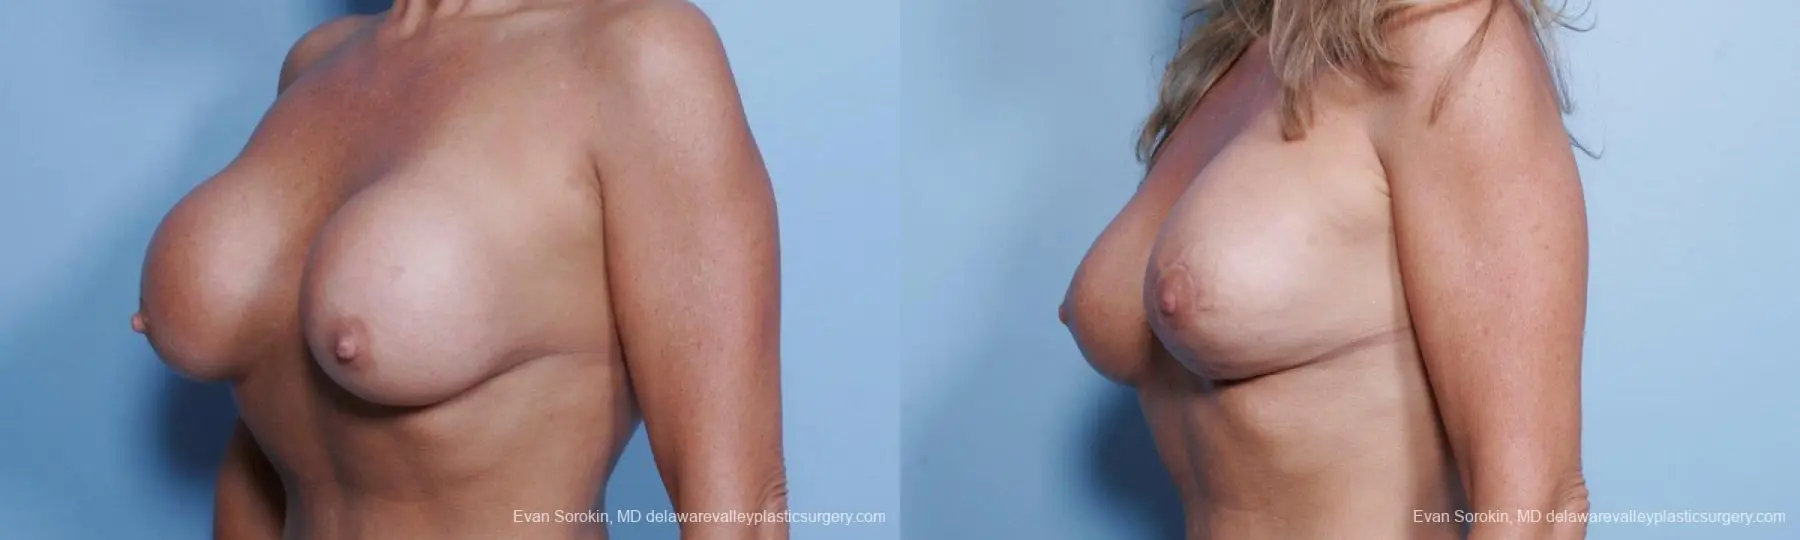 Philadelphia Breast Augmentation 9452 - Before and After 3